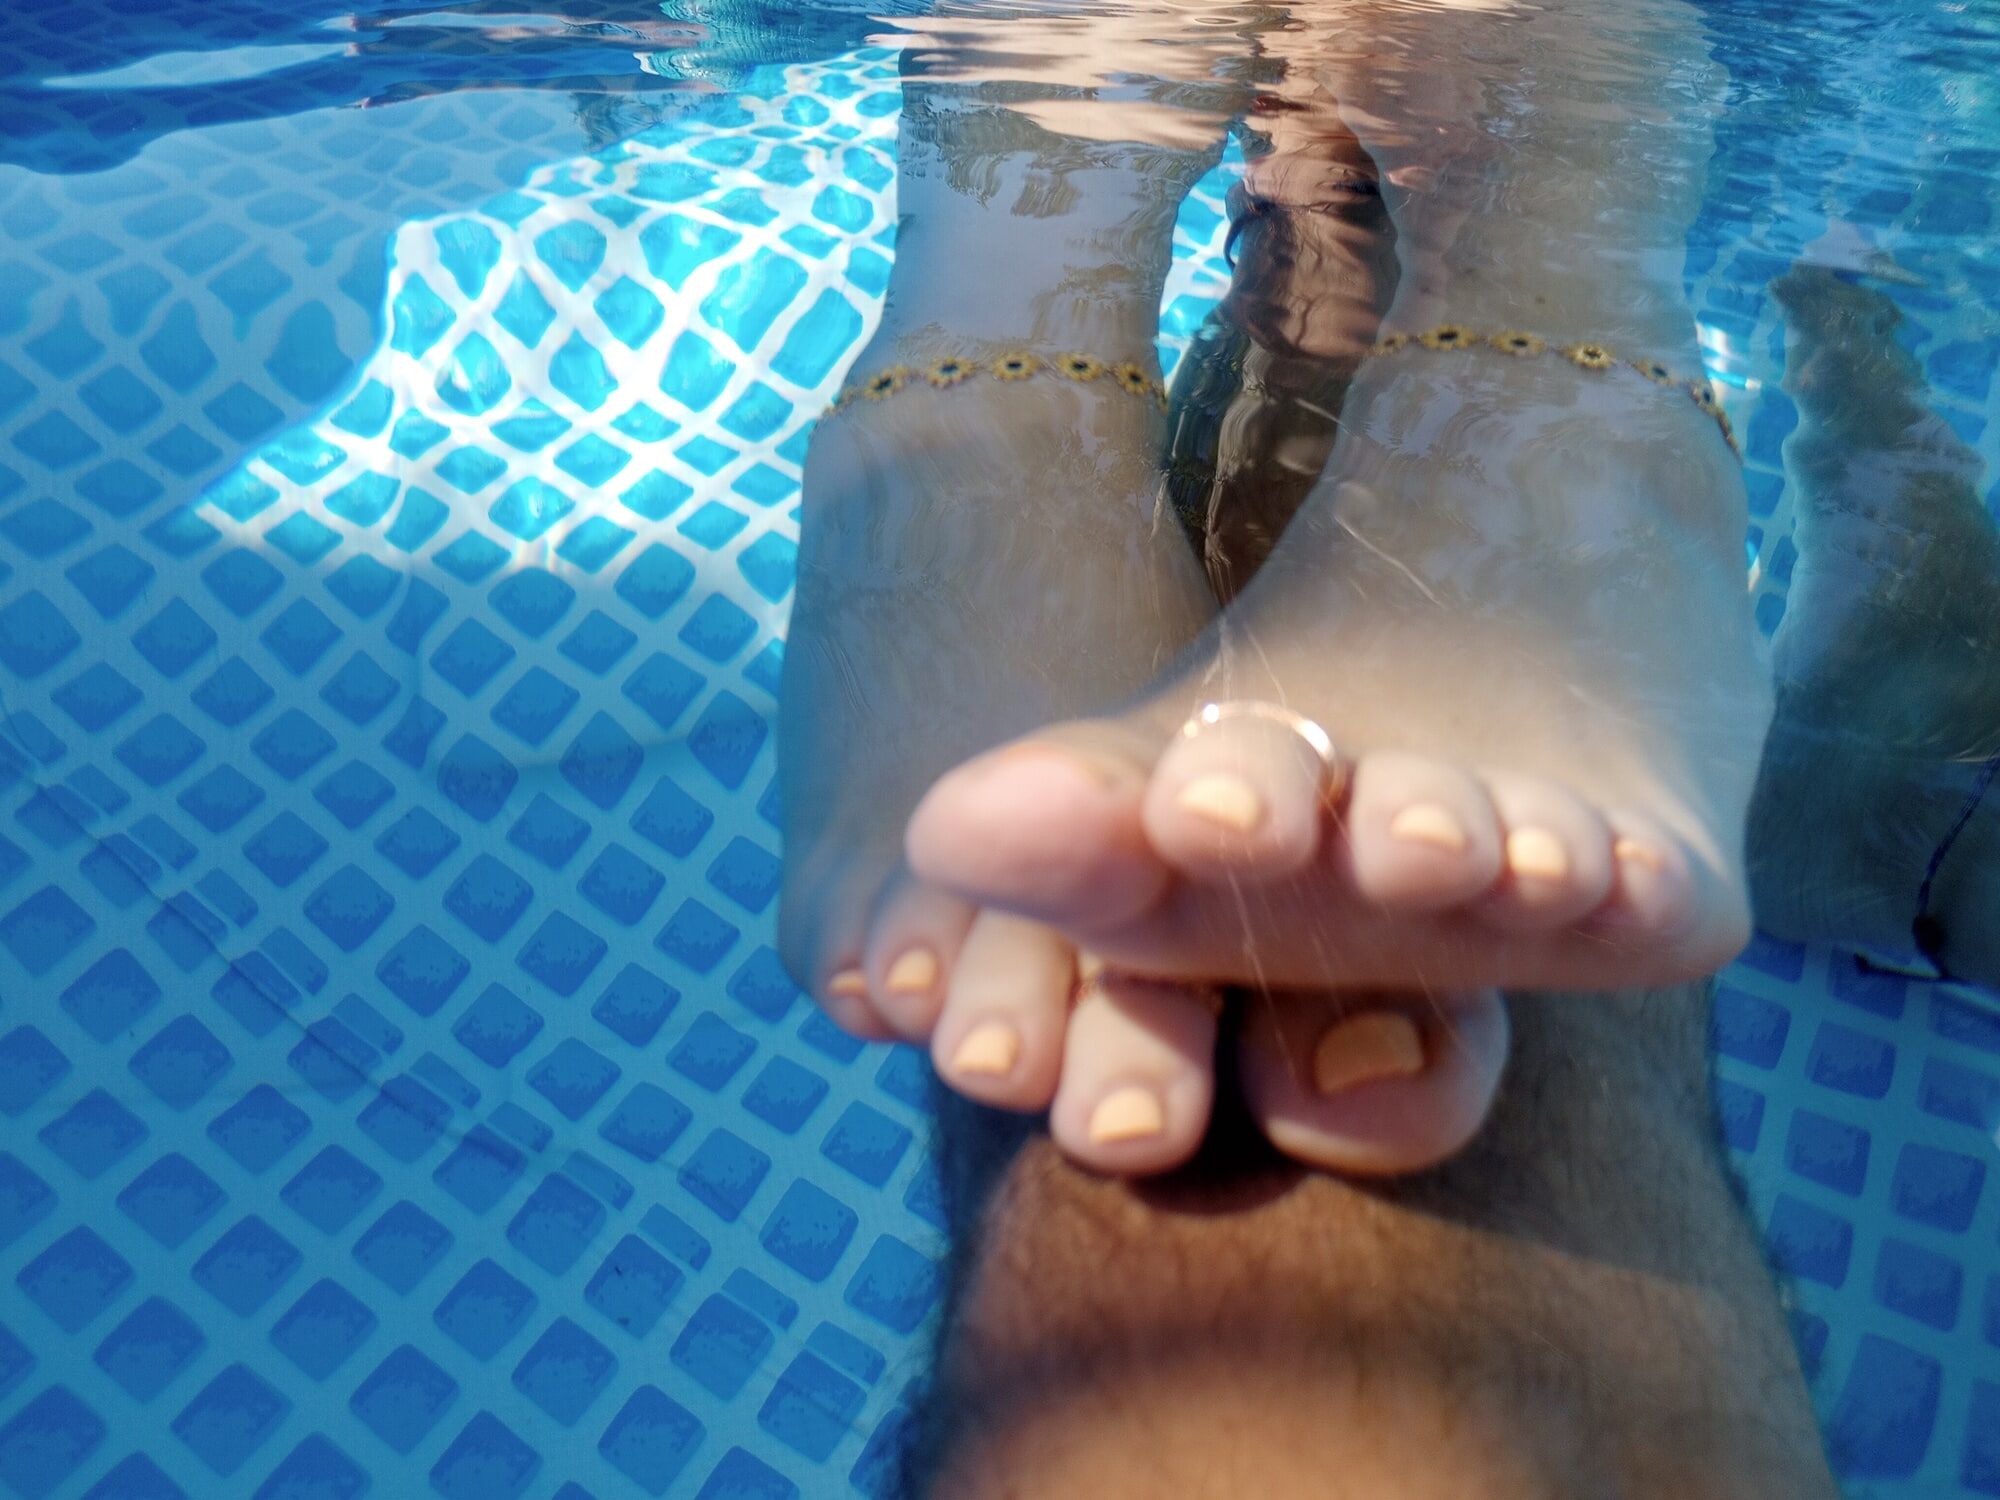 Showing off our pedicures in the pool